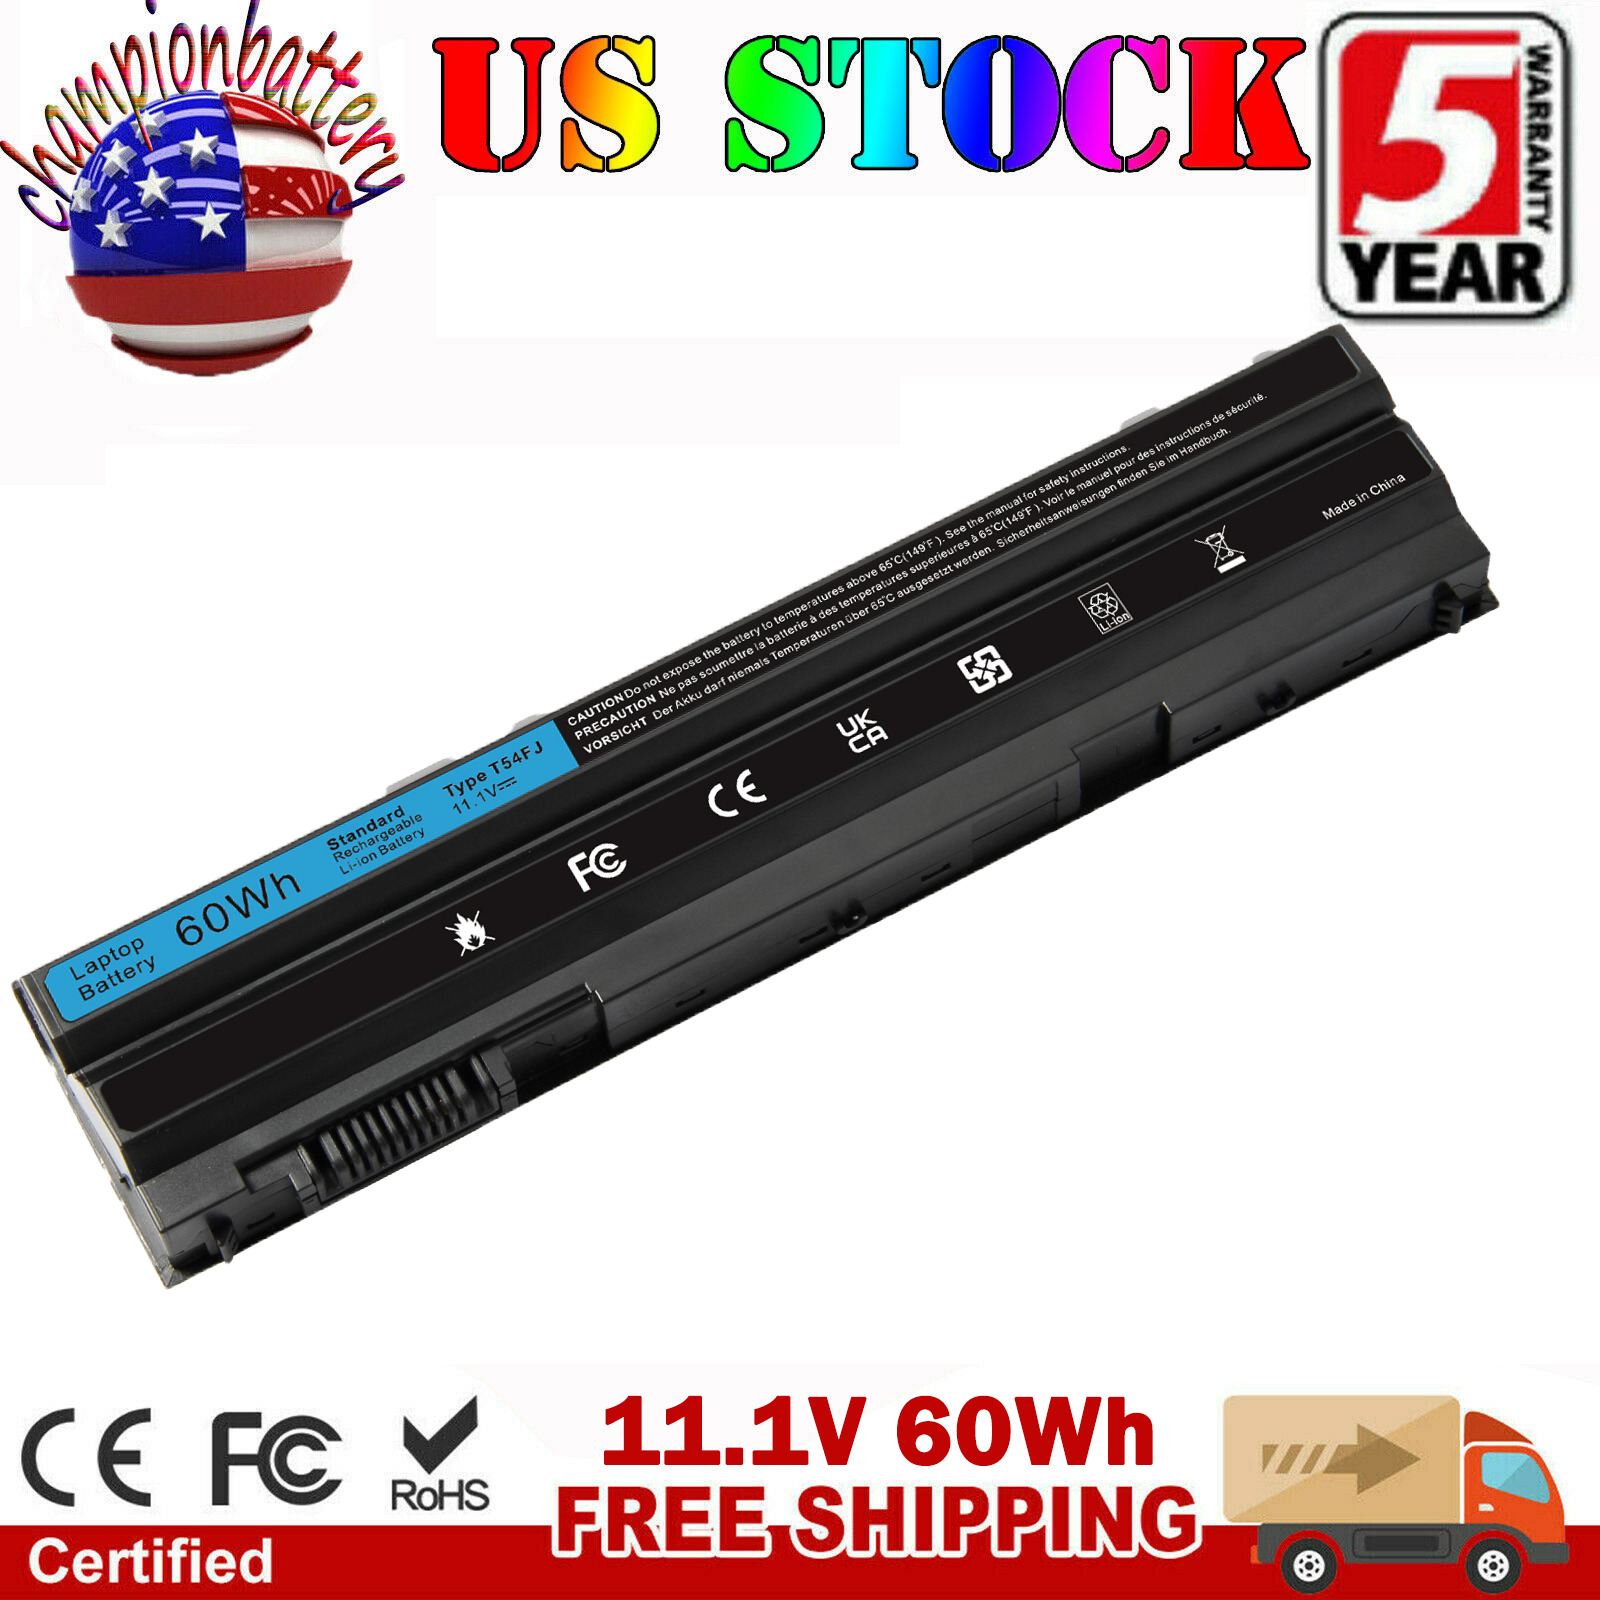 6cell Laptop Battery for Dell Inspiron 5520 5720 7720 17r 15r 7520 04NW9 Battery